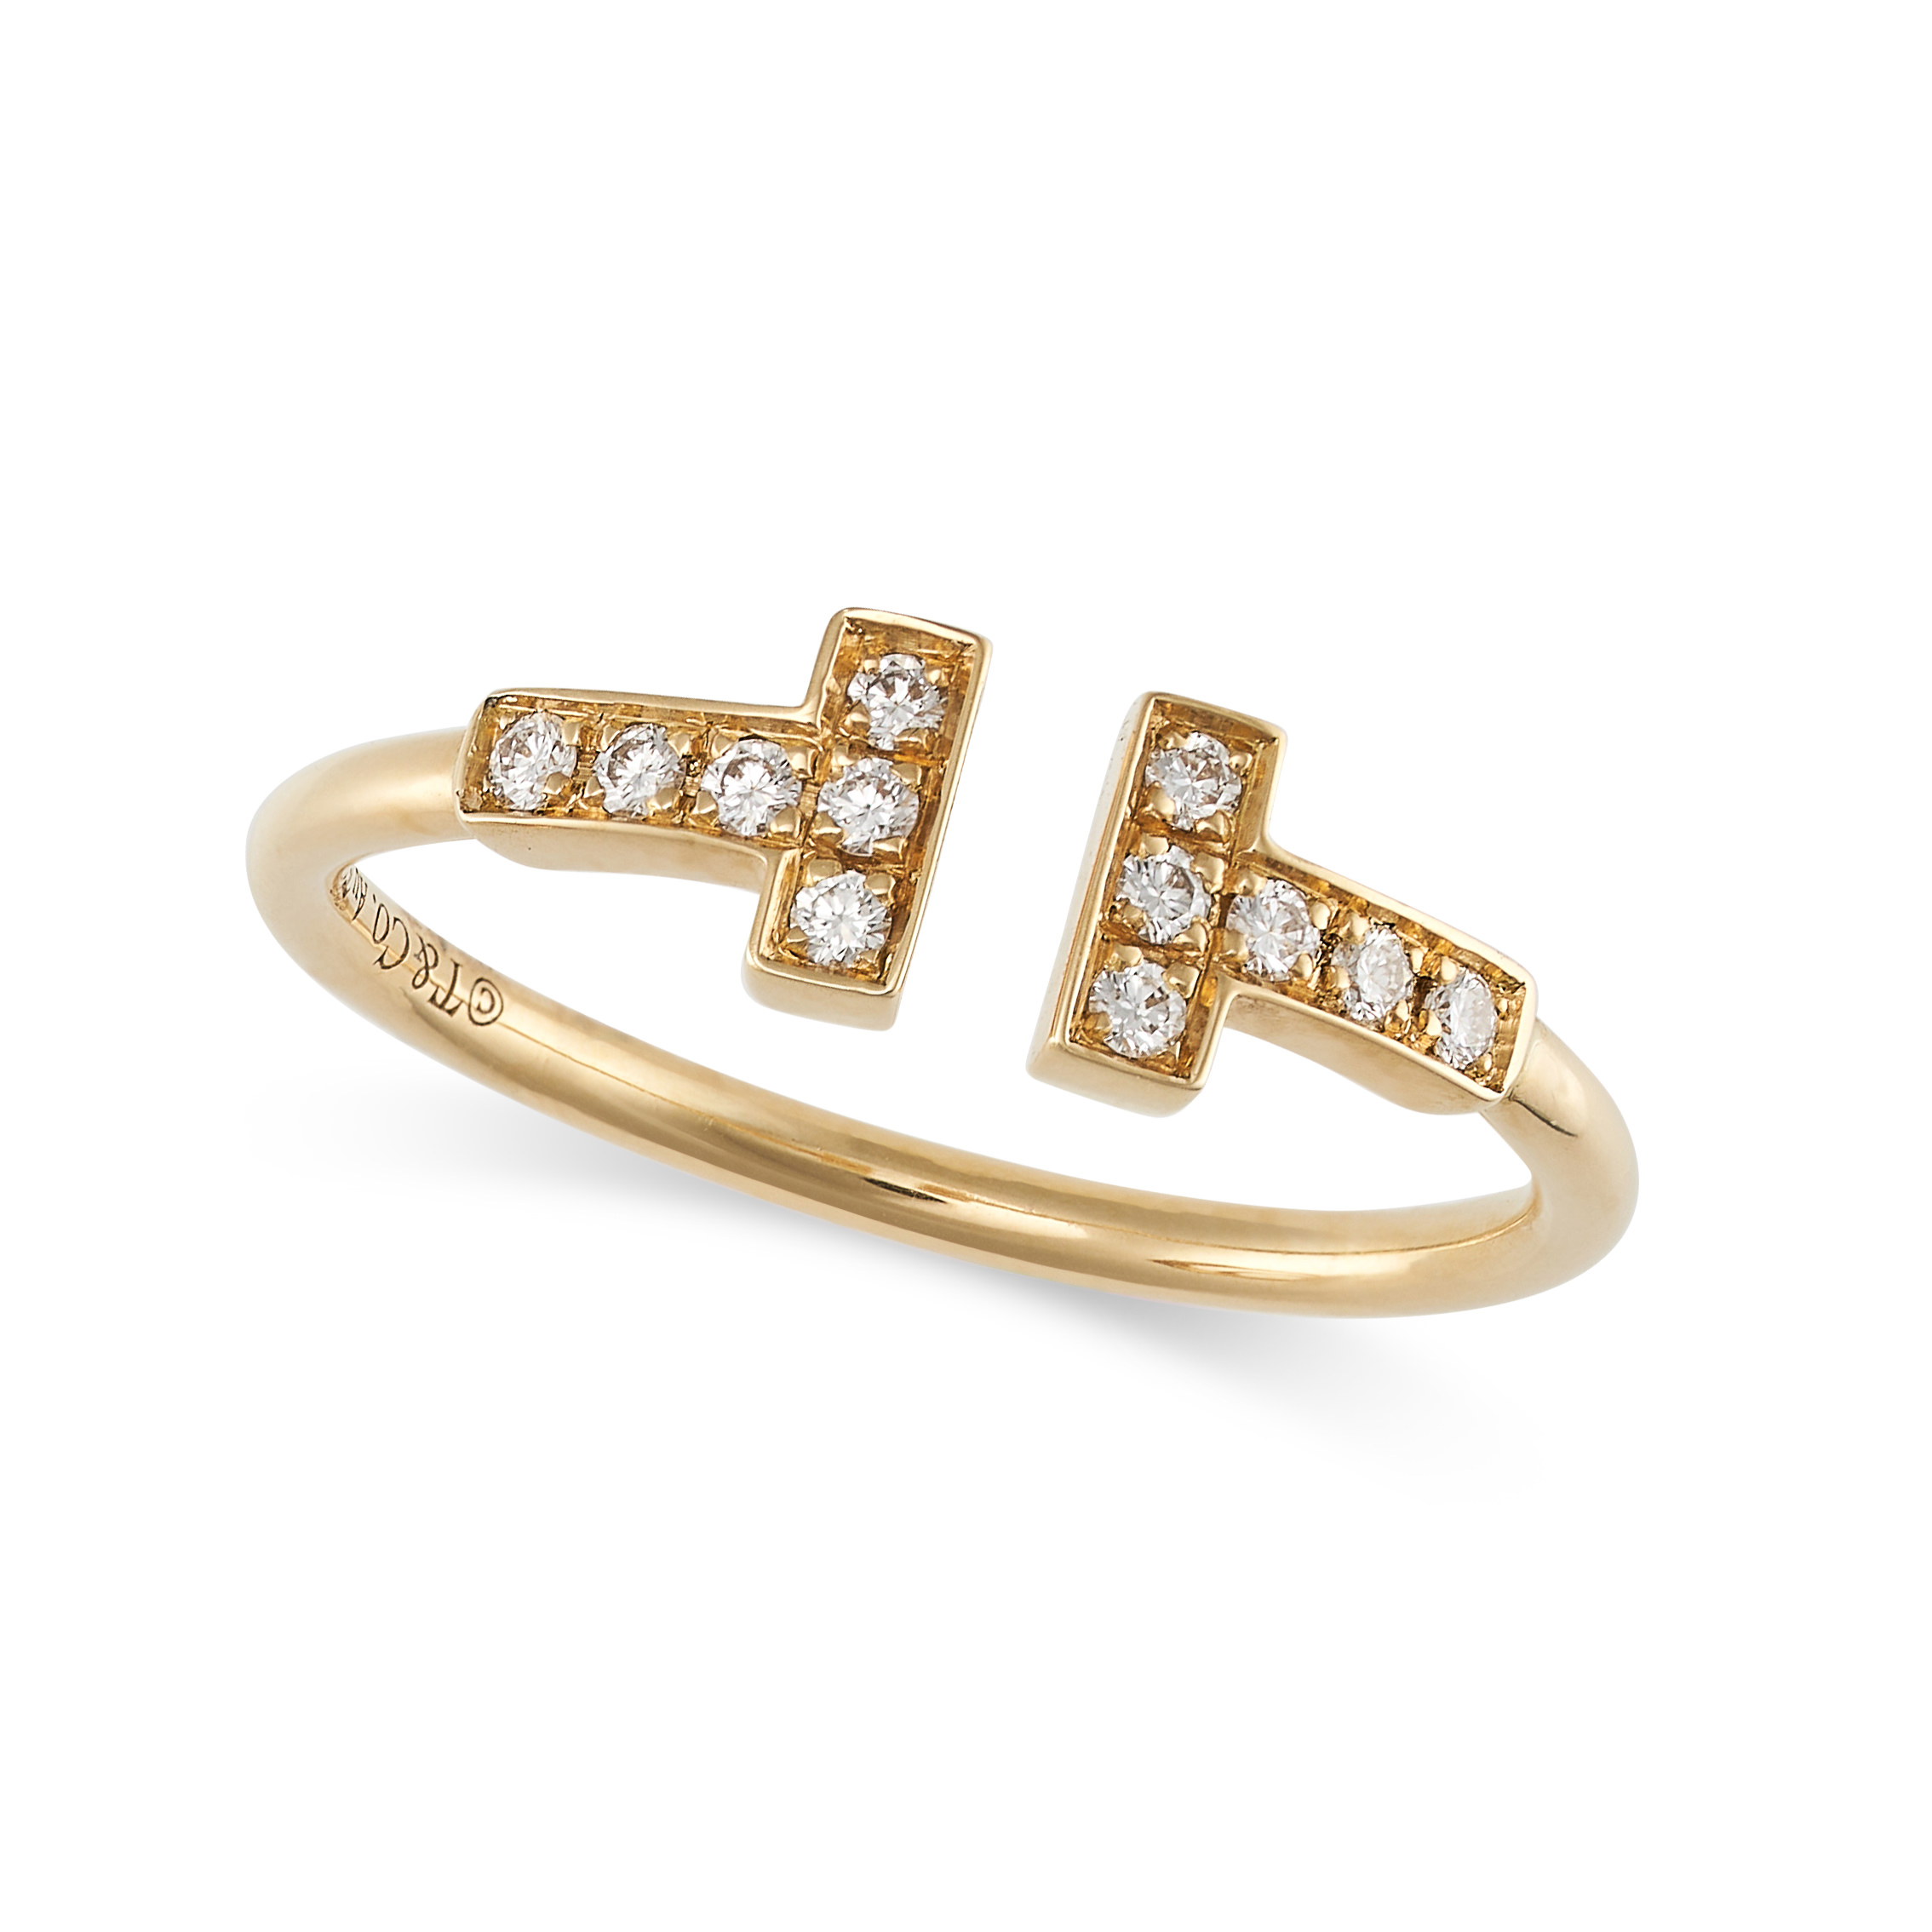 TIFFANY & CO., A DIAMOND T WIRE RING in 18ct yellow gold, designed as two T motifs set with round...